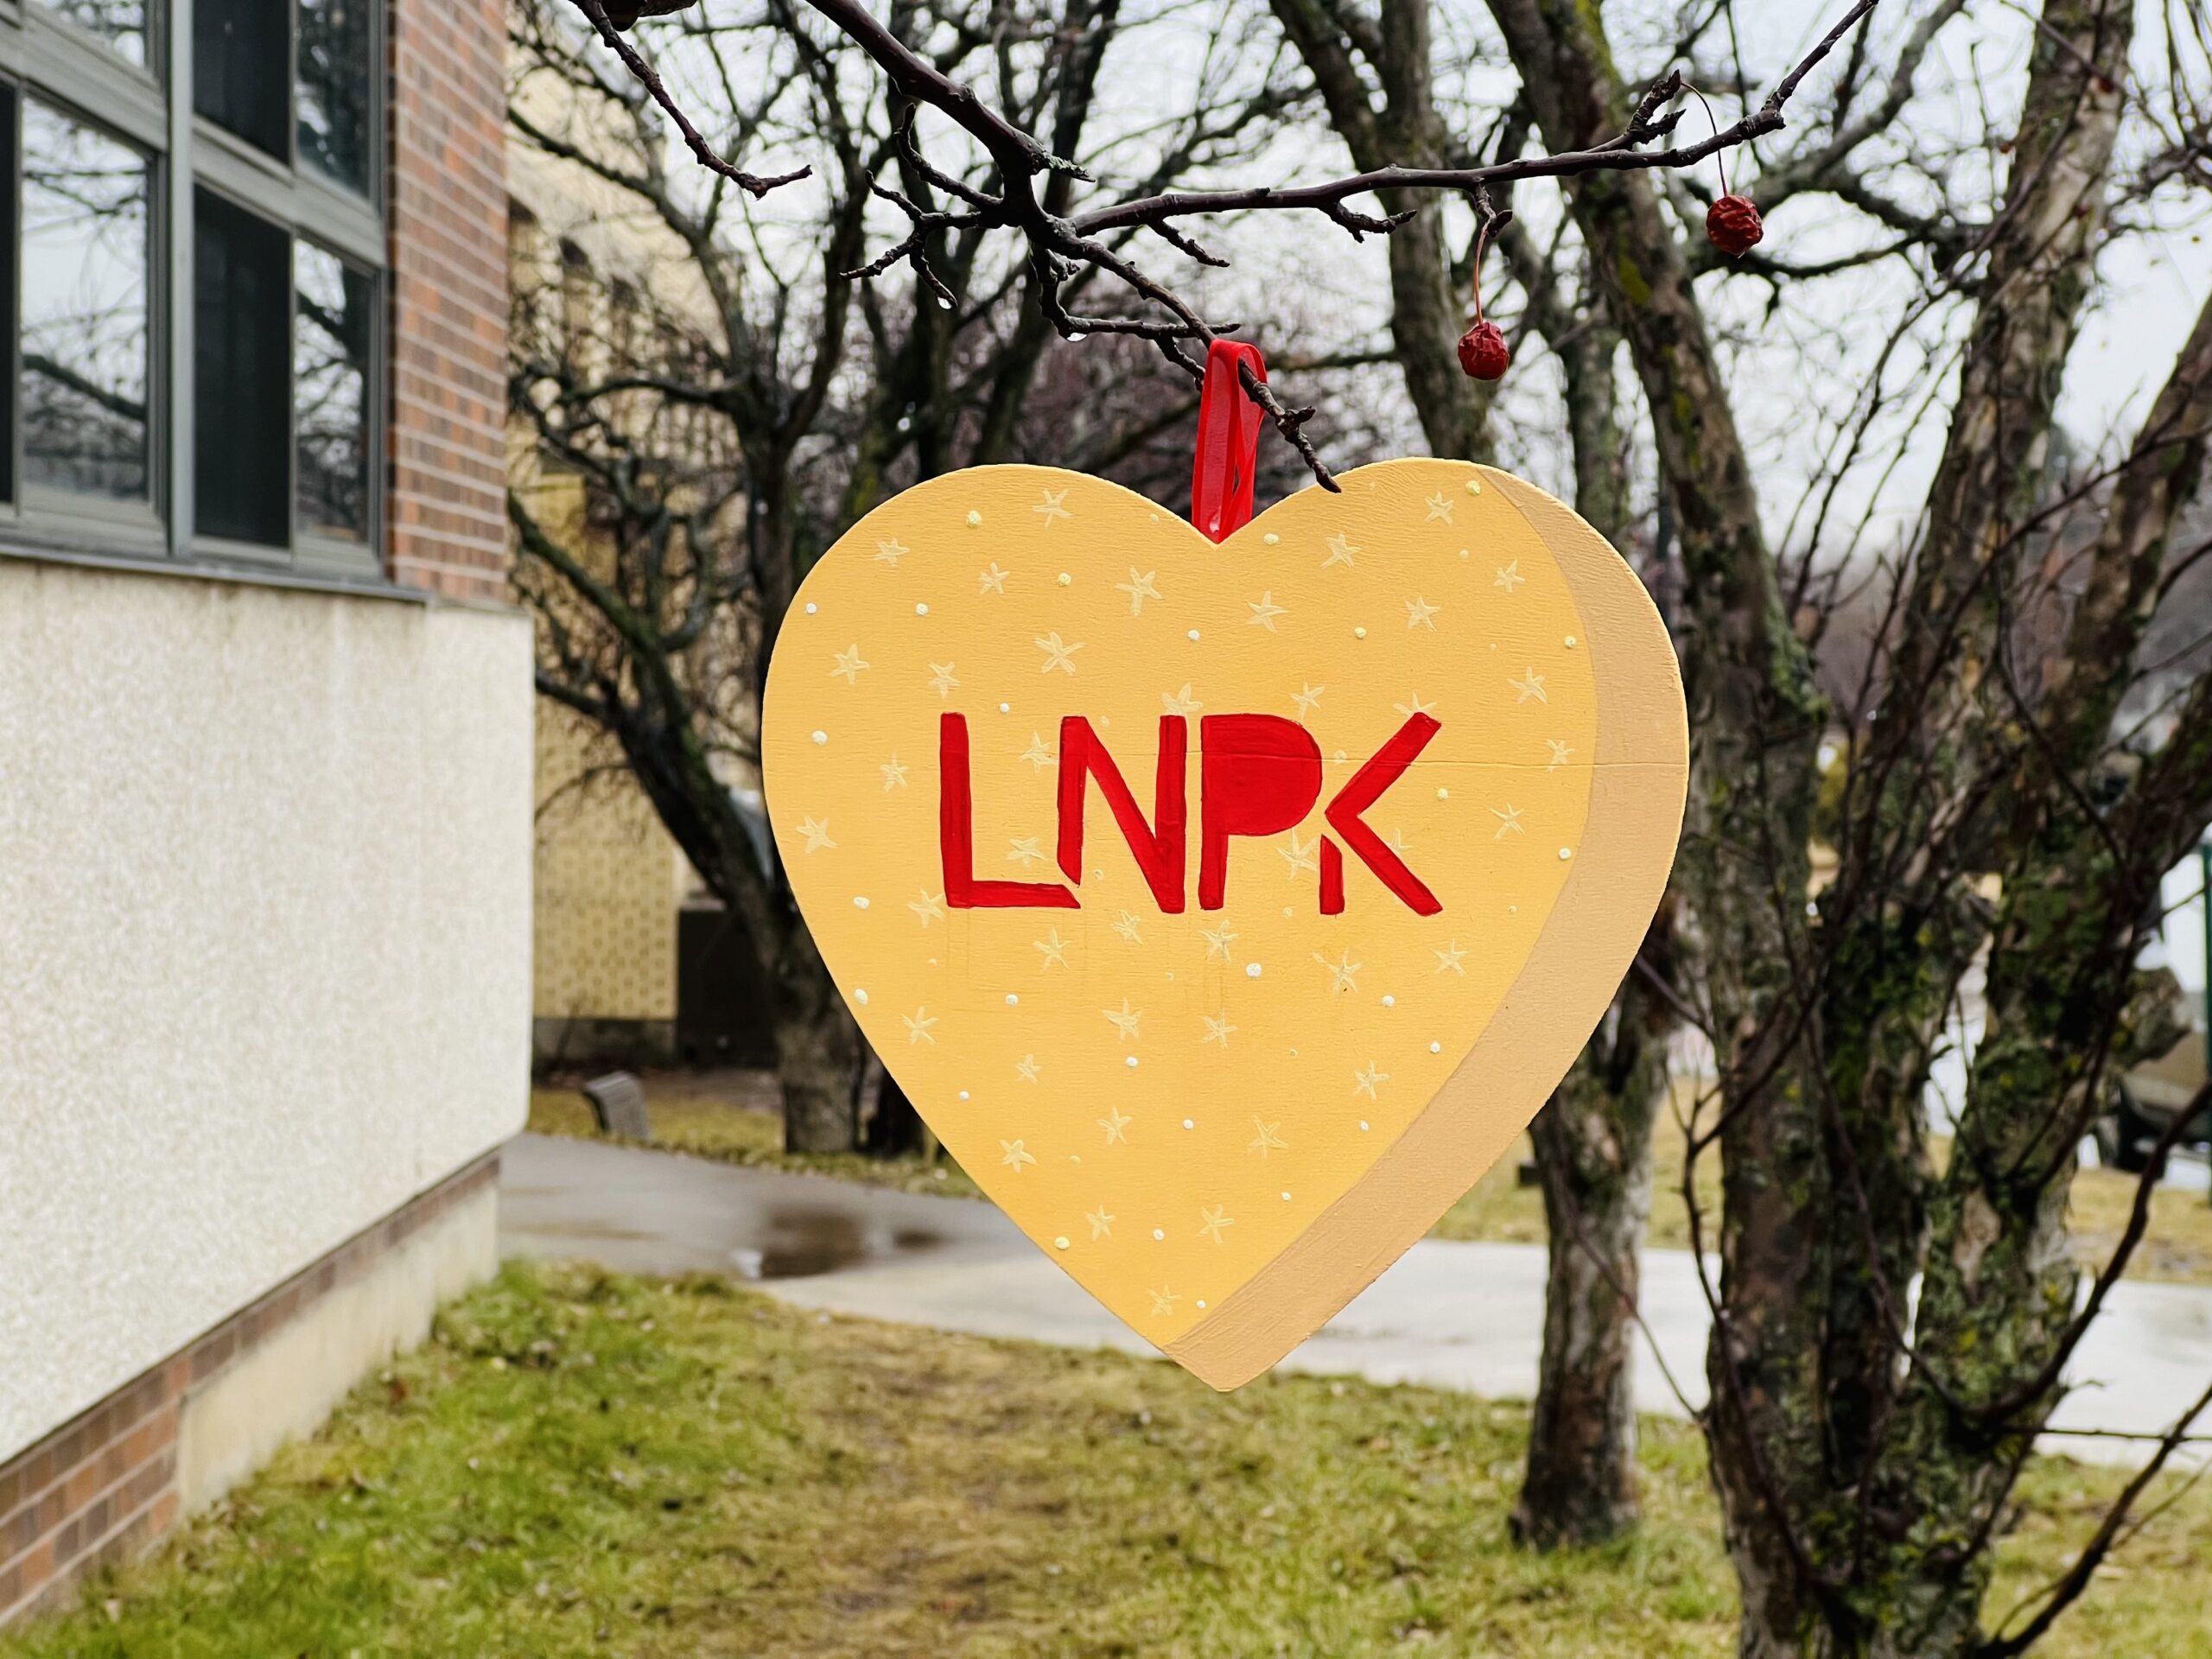 Light orange heart with yellow stars and "LNPK" in red hangs on a tree outside a brick building.